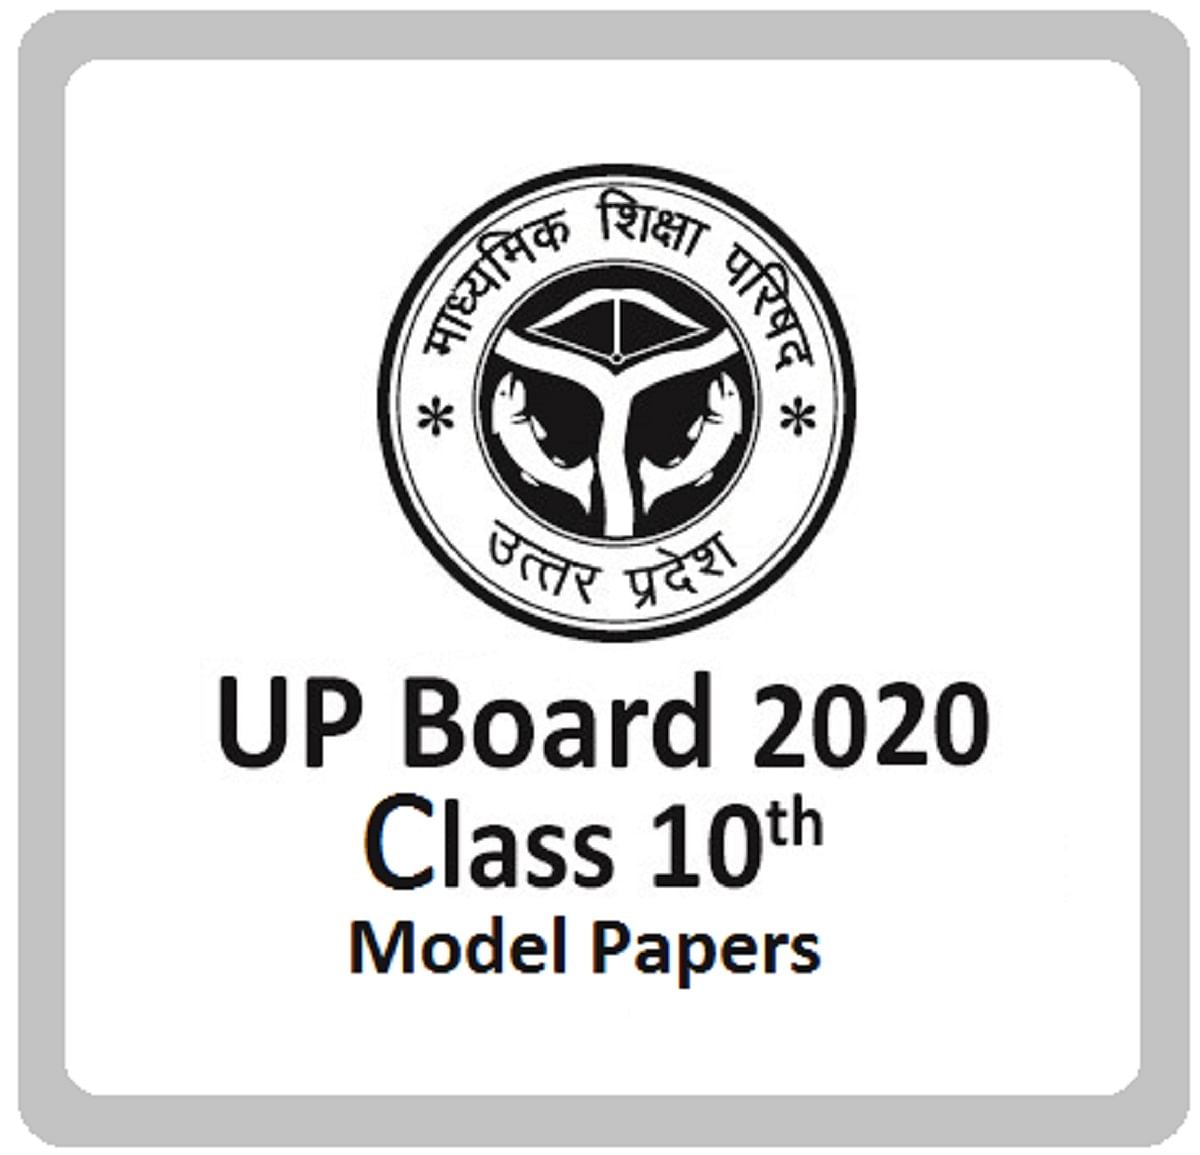 UP Board 2020: Model Paper for Class 10th Science Exam